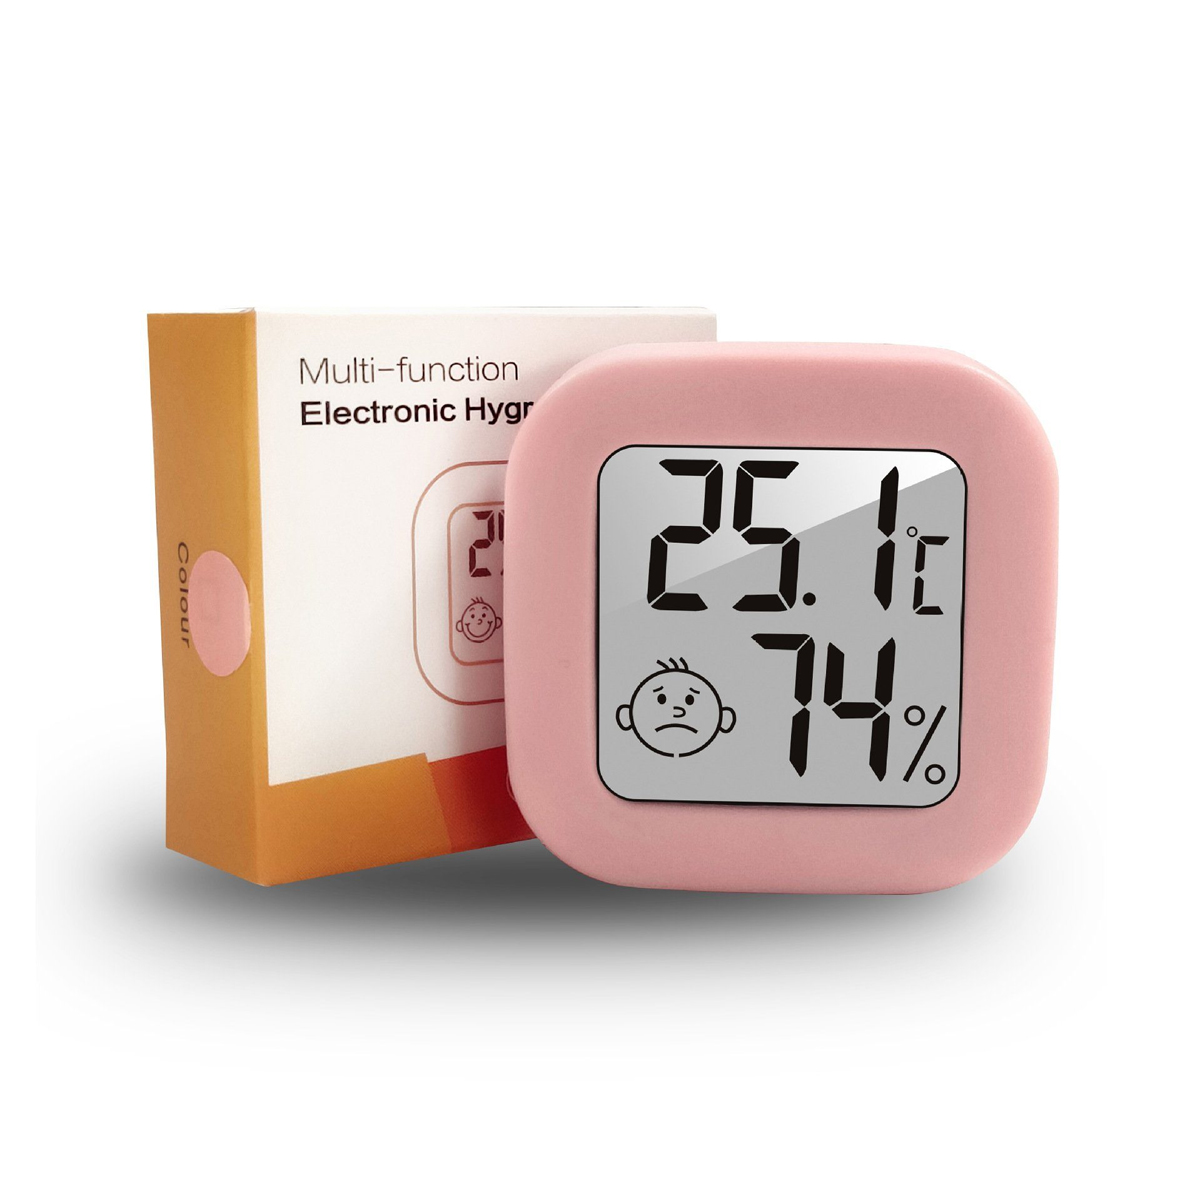 BABY Mini Raumthermometer Smart Hygrothermometer Smiley-Gesicht Connect Digital Thermometer/Hygrometer JA mit